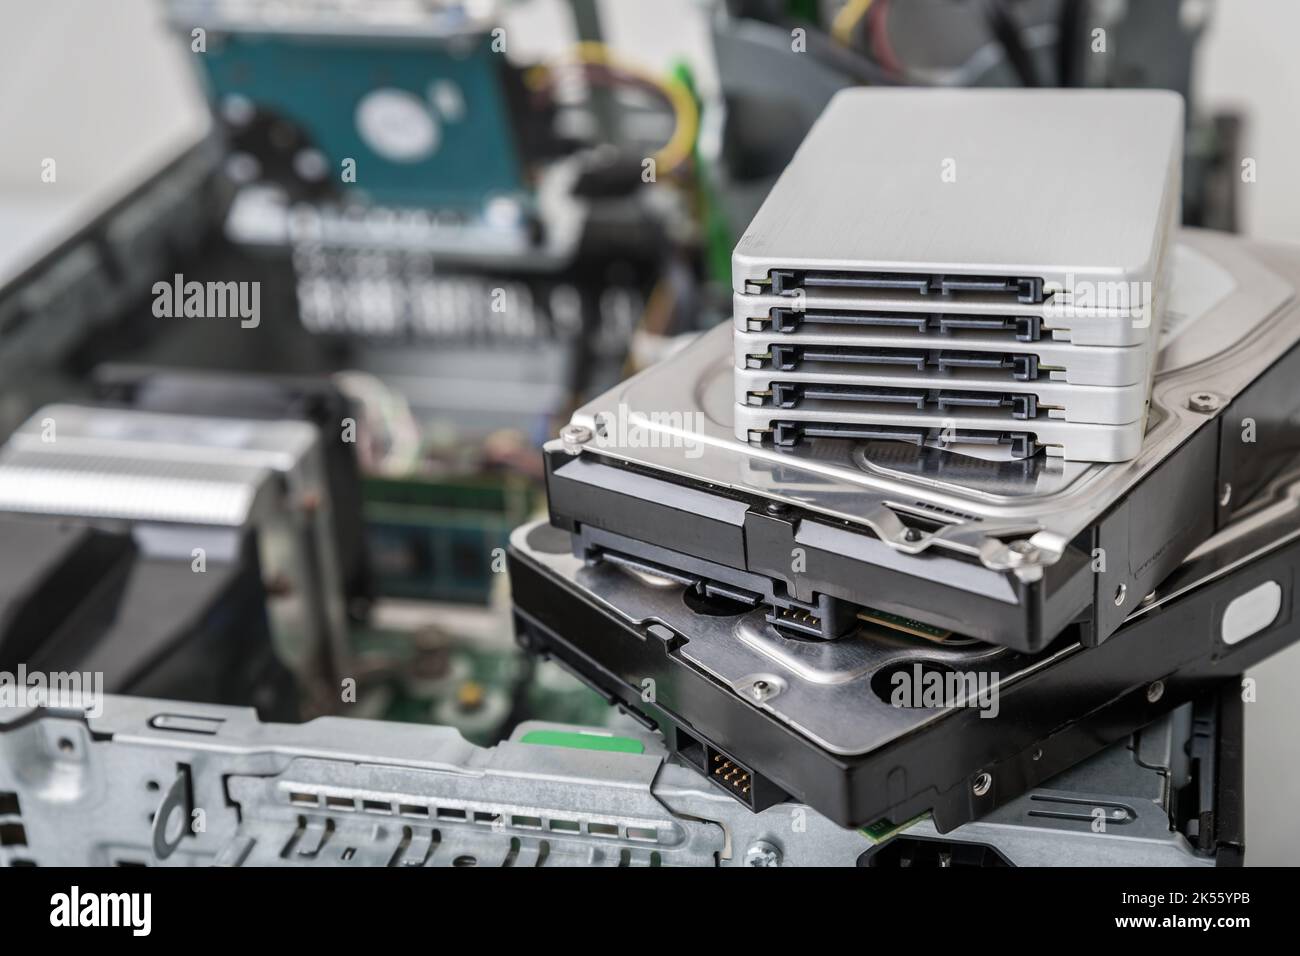 Closed-up view of SSD and SATA hard disk drives on top of computer. Repair and dat recovery concept Stock Photo